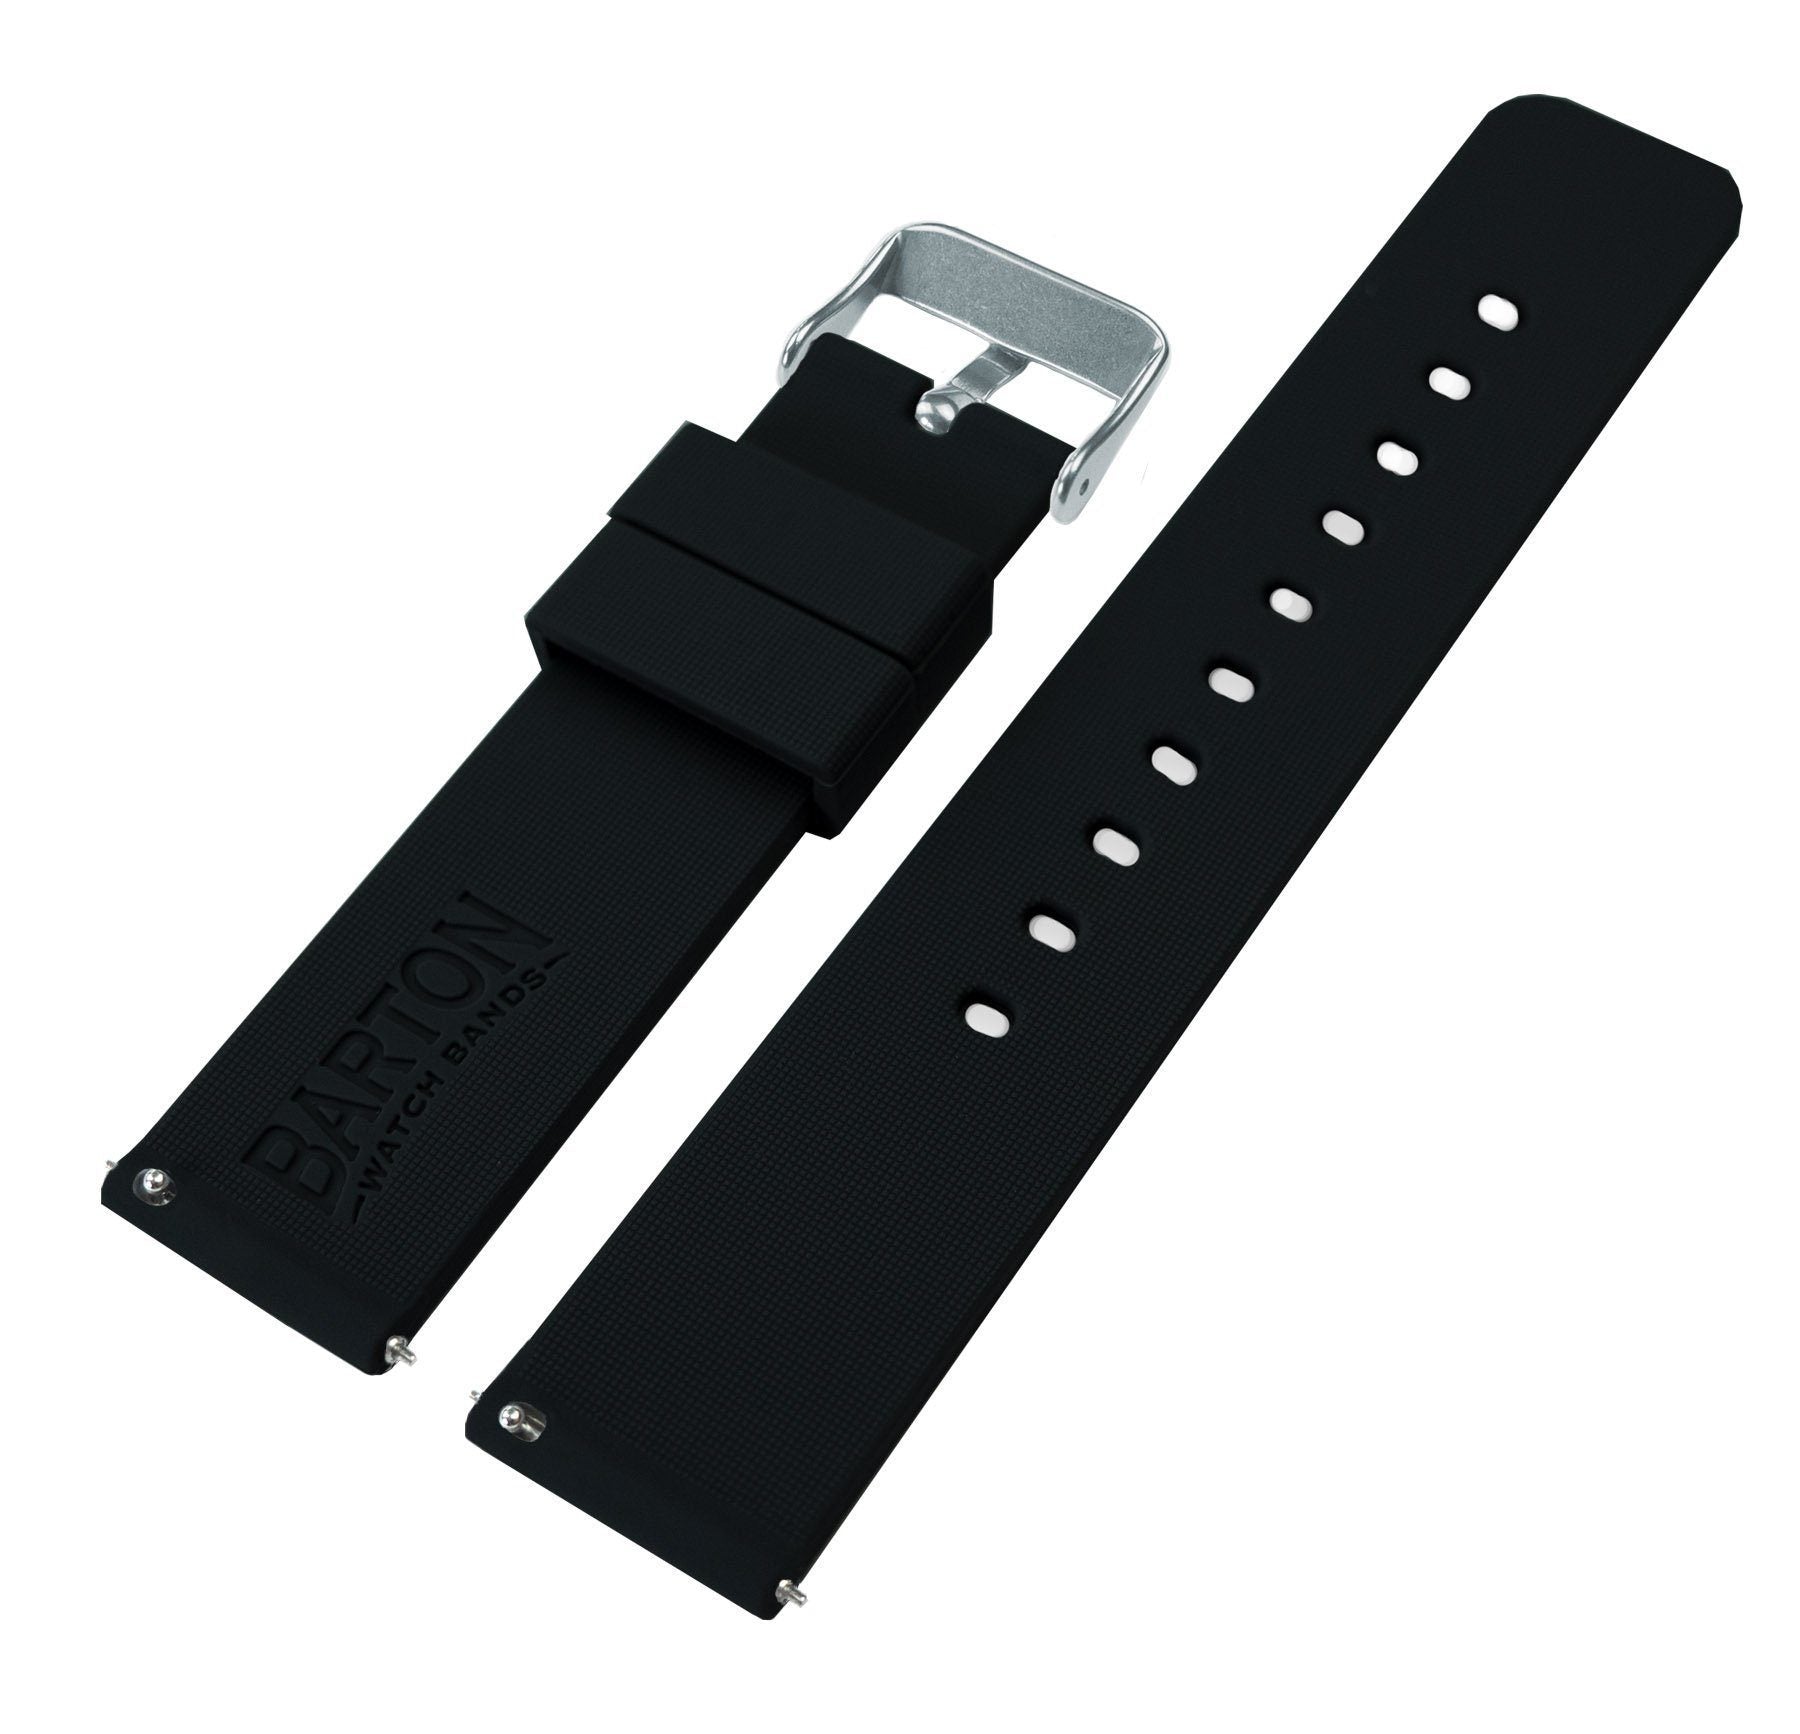 Pebble Smart Watches | Silicone | Black - Barton Watch Bands